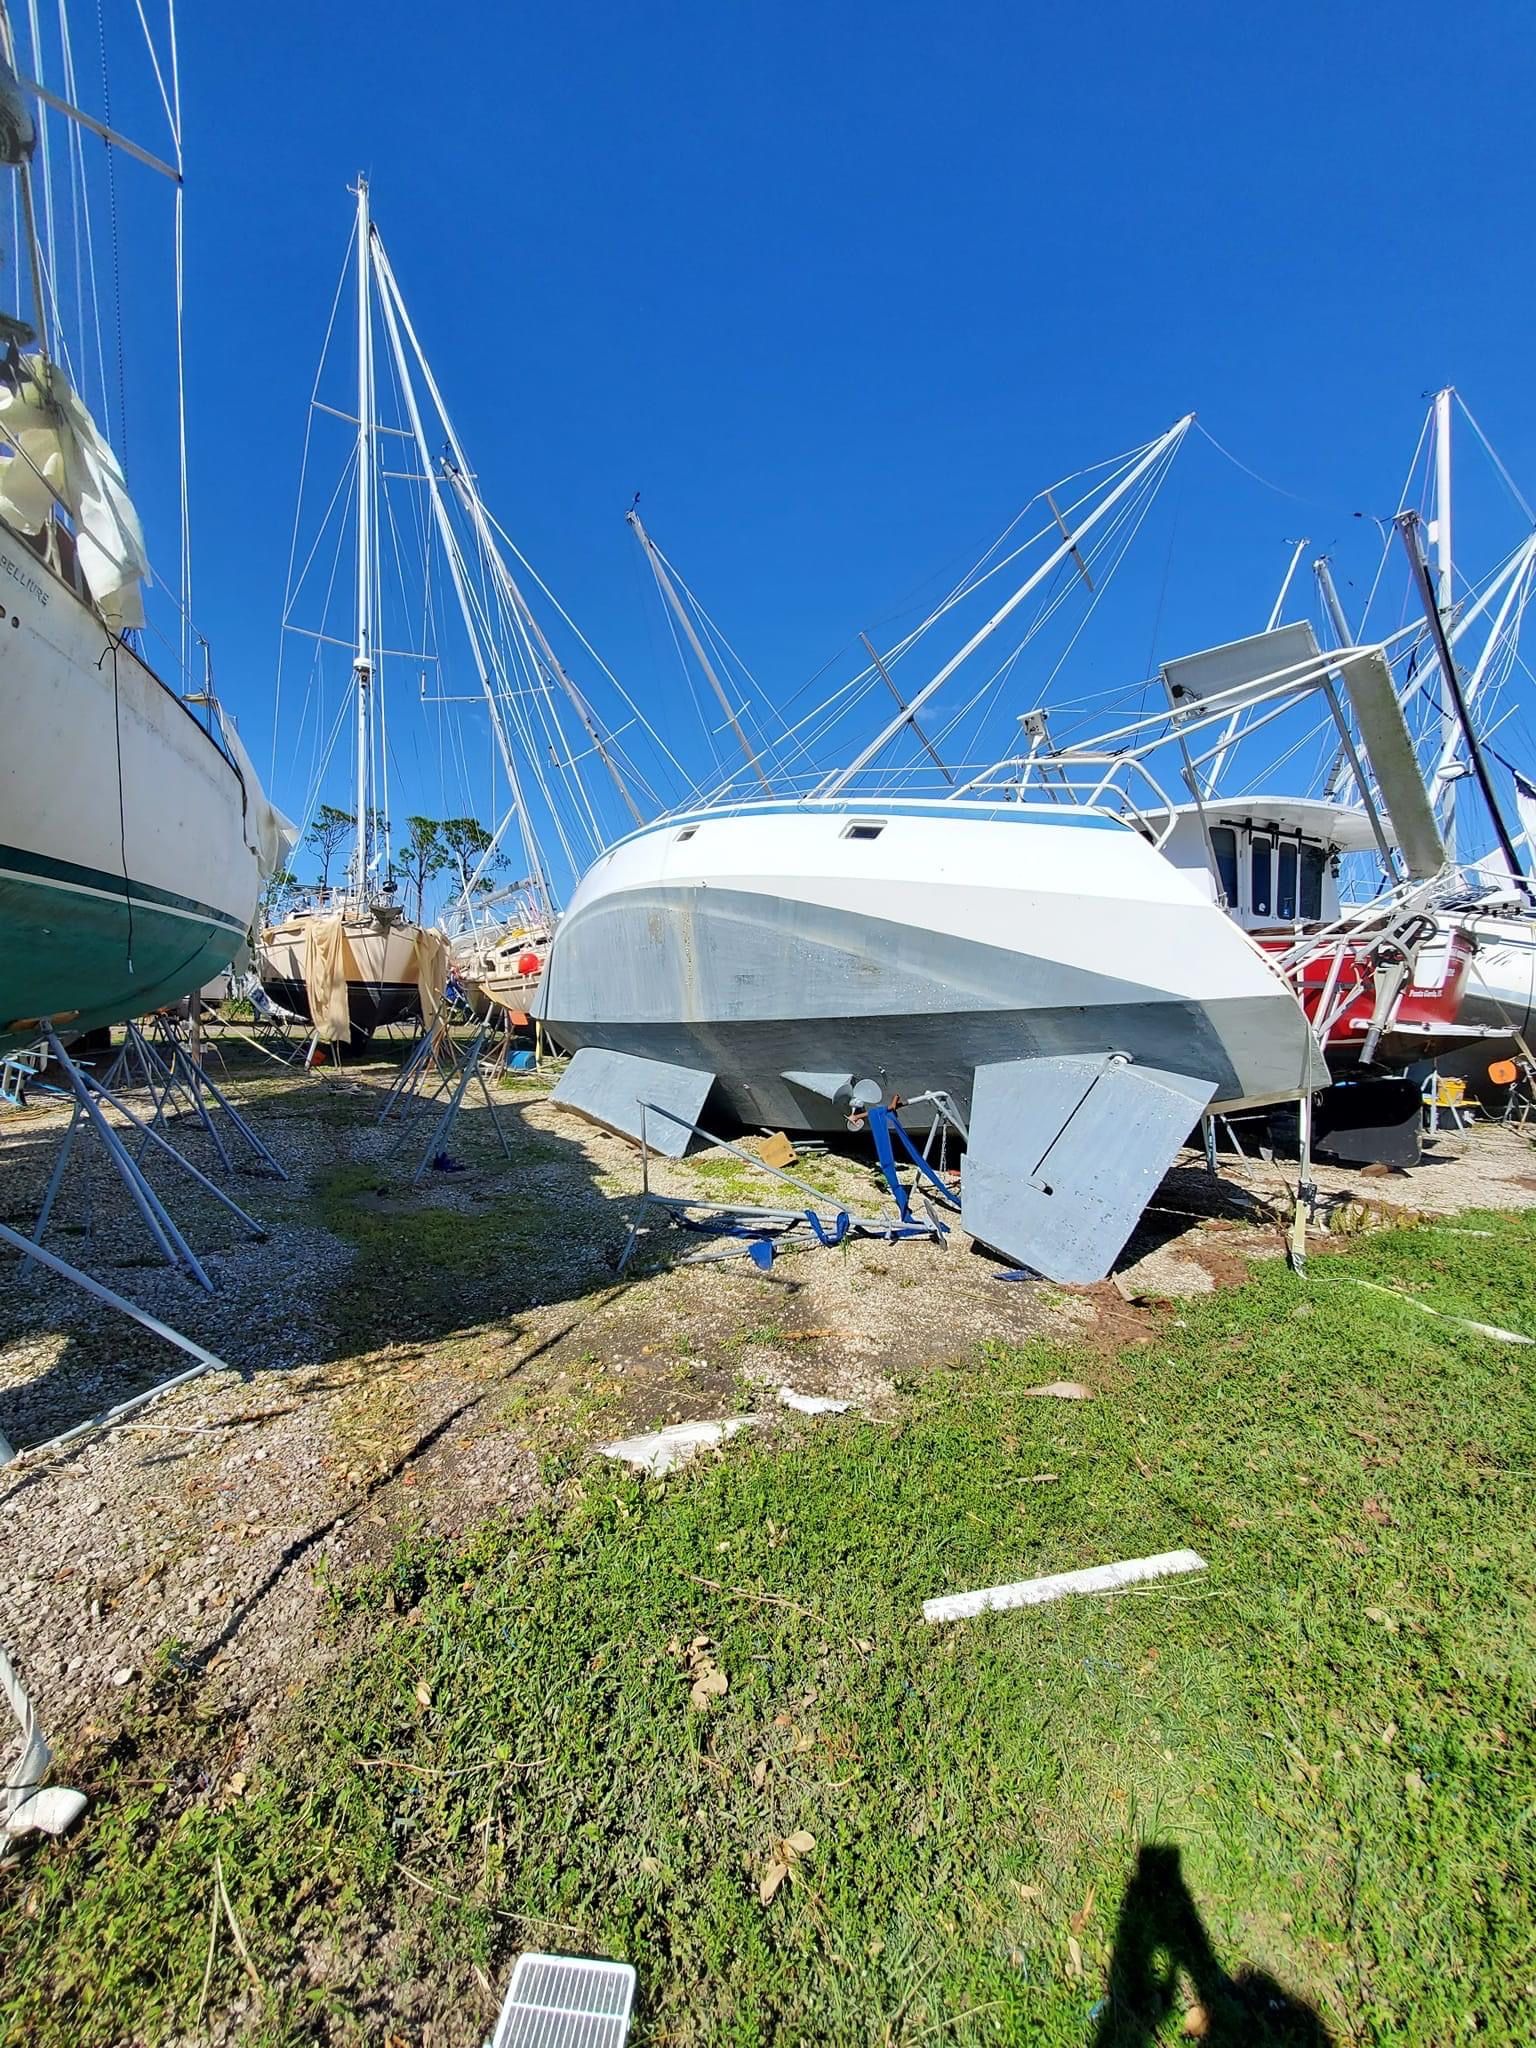 Ian Exposes Risks to Boats in Hurricane Zone